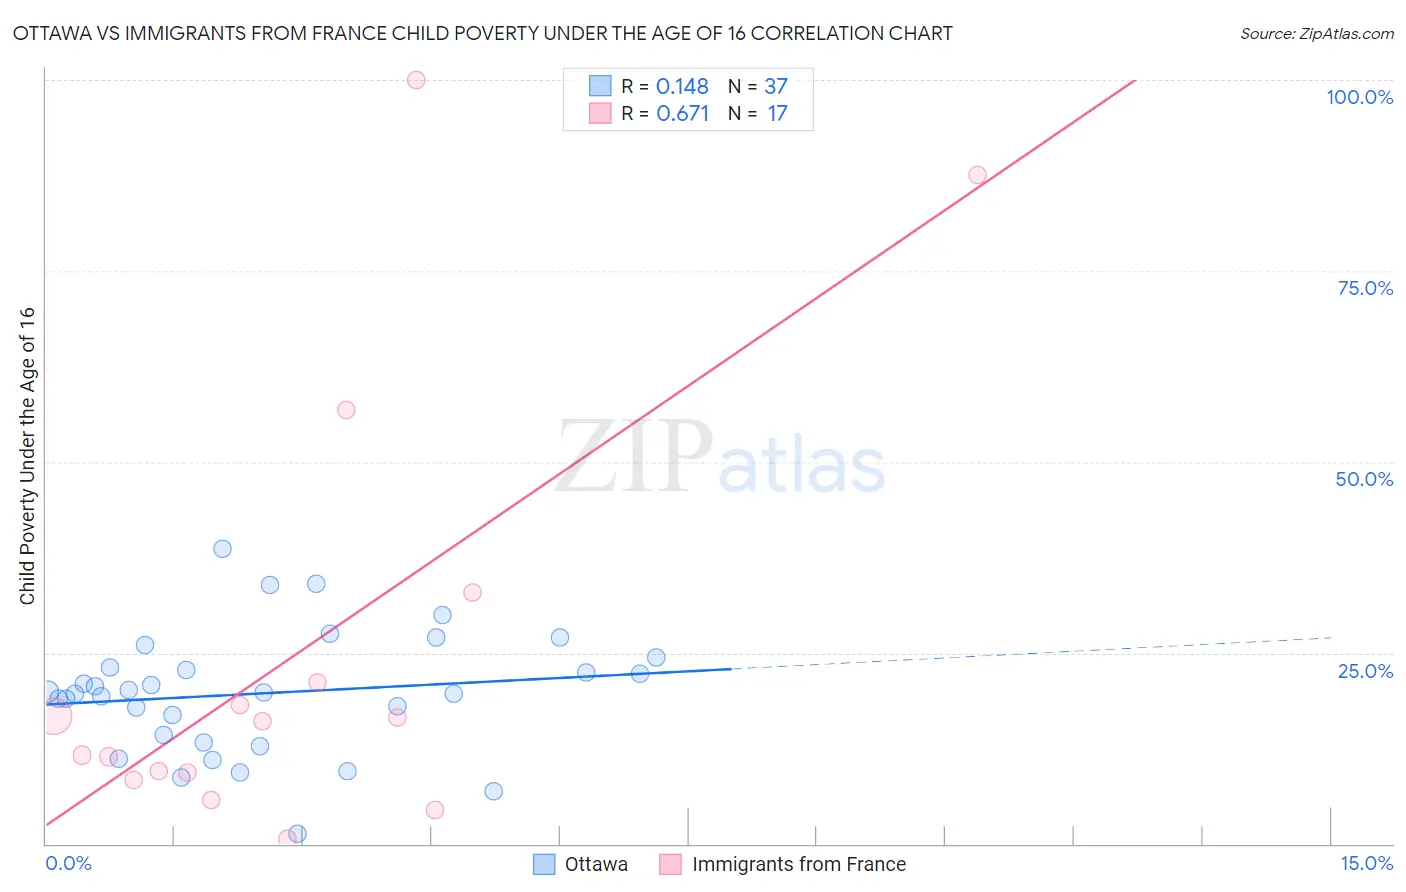 Ottawa vs Immigrants from France Child Poverty Under the Age of 16